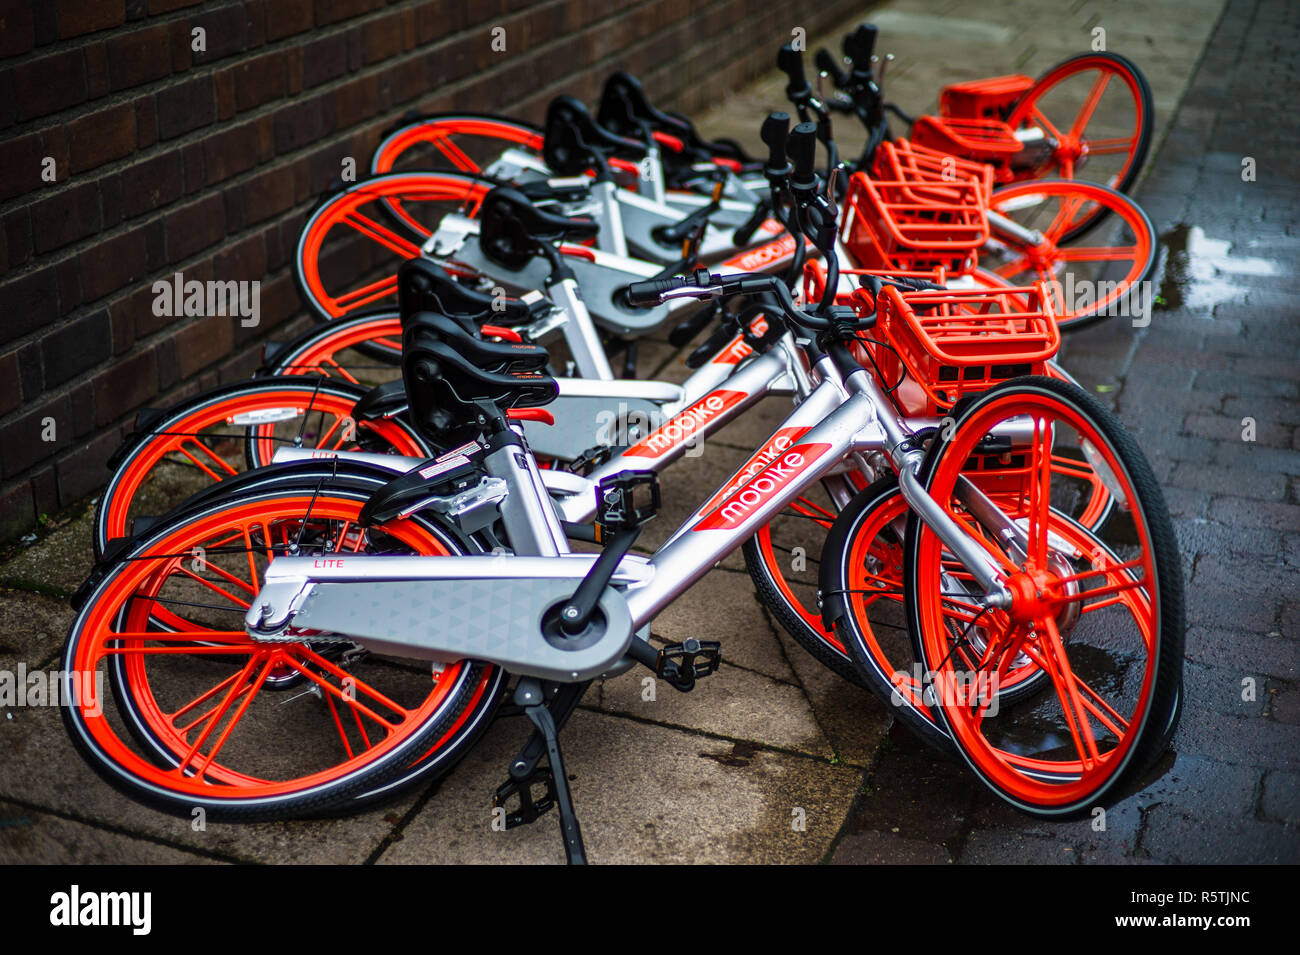 Mobike dockless hire bikes in Cambridge UK - Mobike is a Chinese bike hire company rolling out across the UK Stock Photo